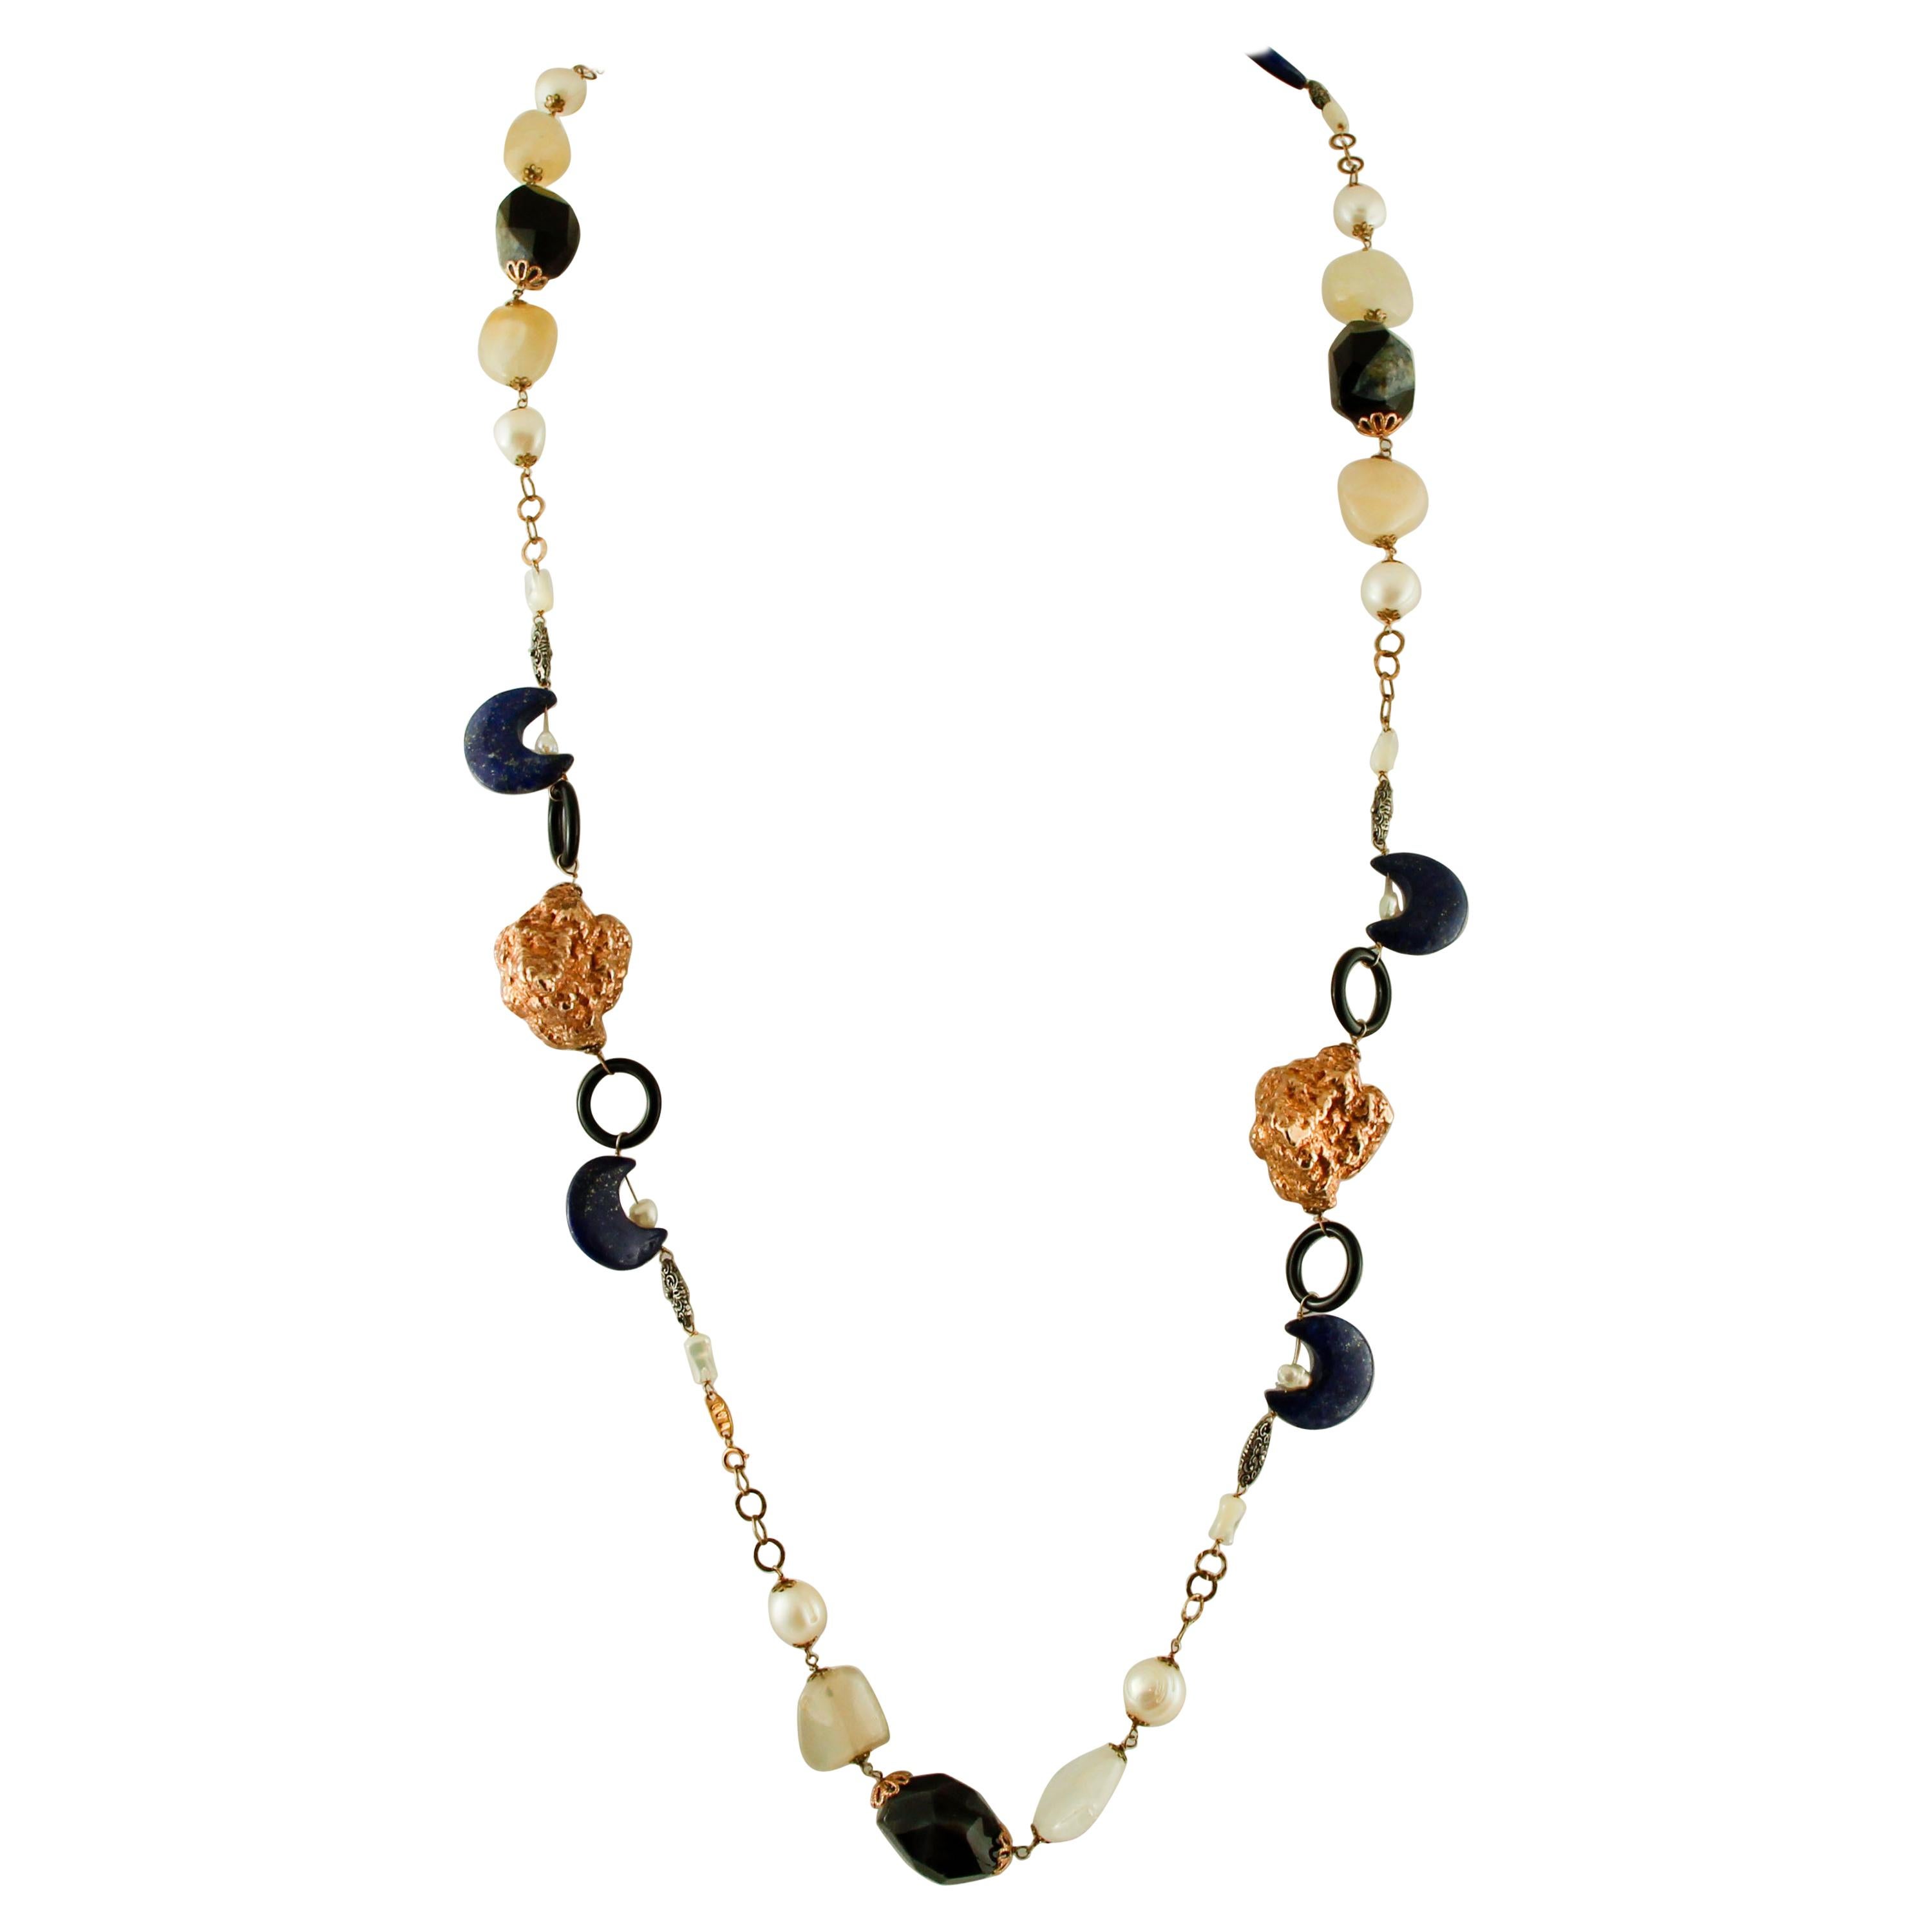 Agate, Lapis lazuli, Pearl, White Stones, Moonstone, 9k Gold&Silver Necklace For Sale